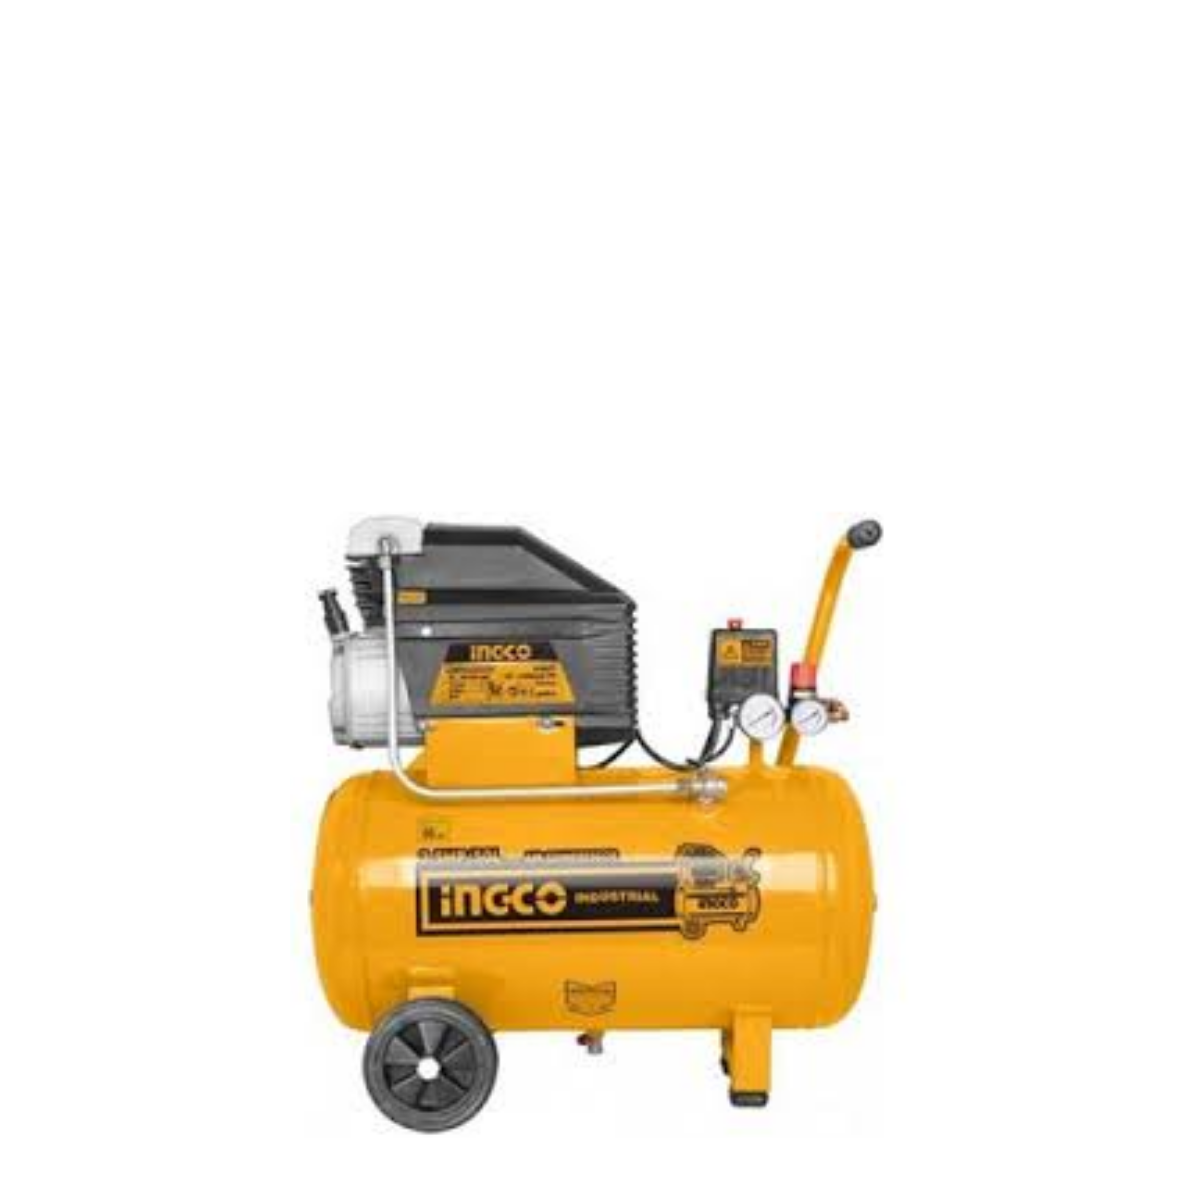 Ingco Tools St Lucia INGCO Air Compressor 50L 25508